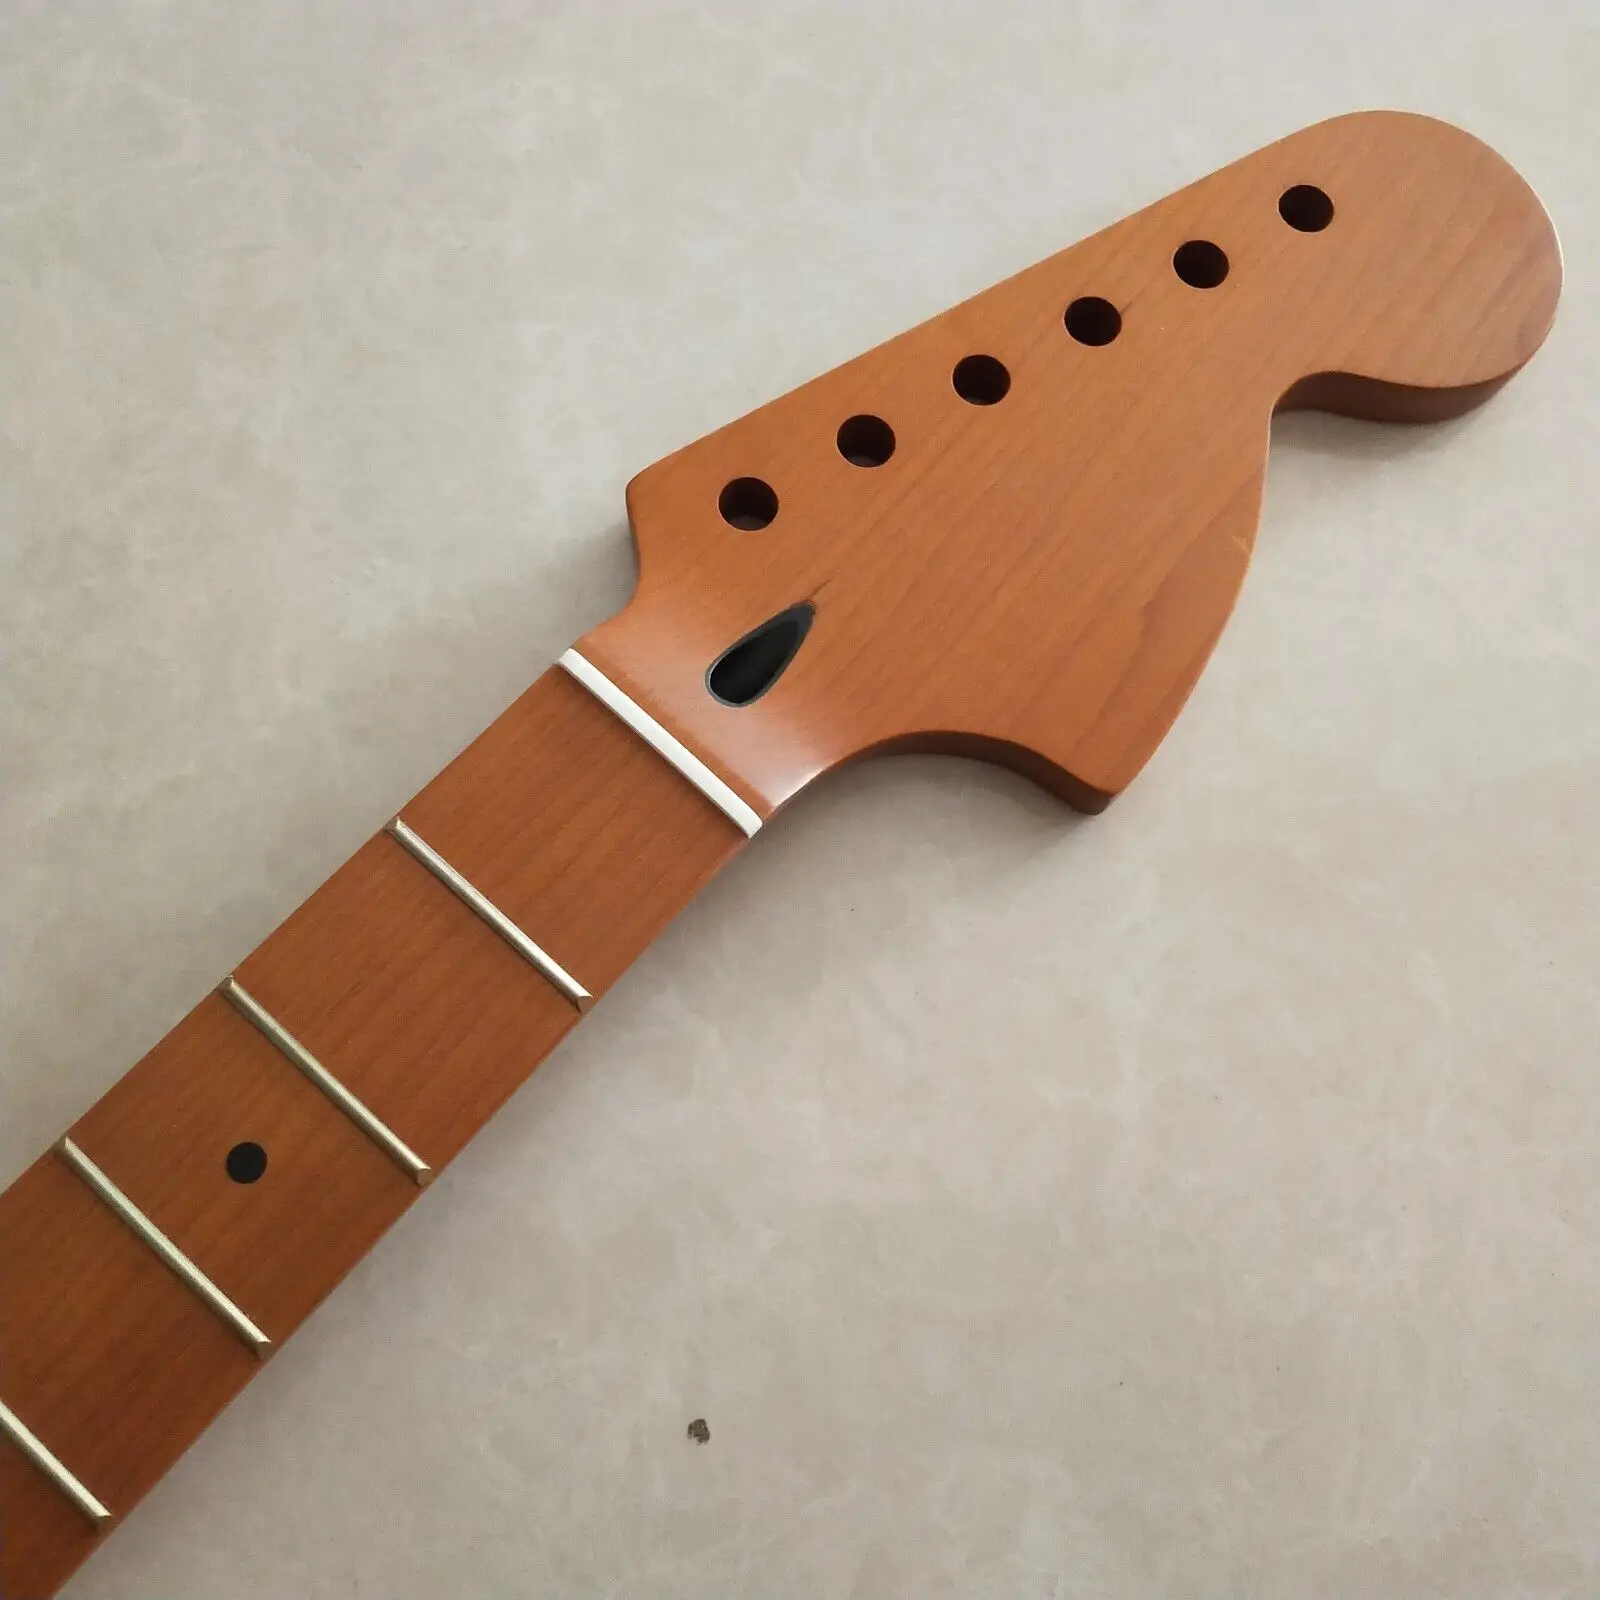 

Roasted Maple Guitar Neck 22 Fret 25.5 Inch Fingerboard Dot Inlay Big head parts